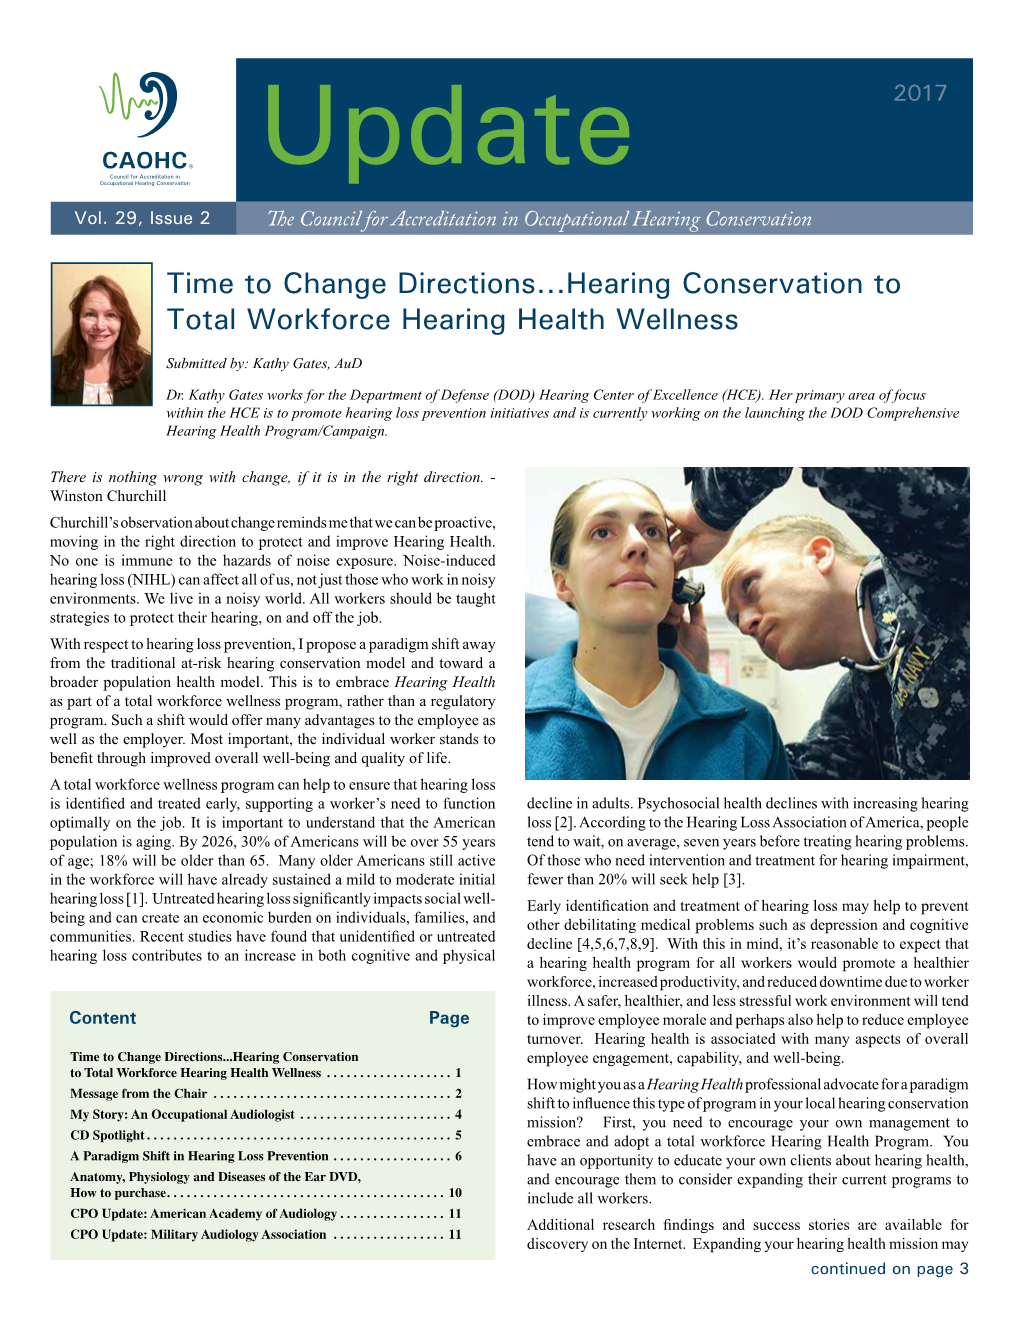 Time to Change Directions...Hearing Conservation to Total Workforce Hearing Health Wellness